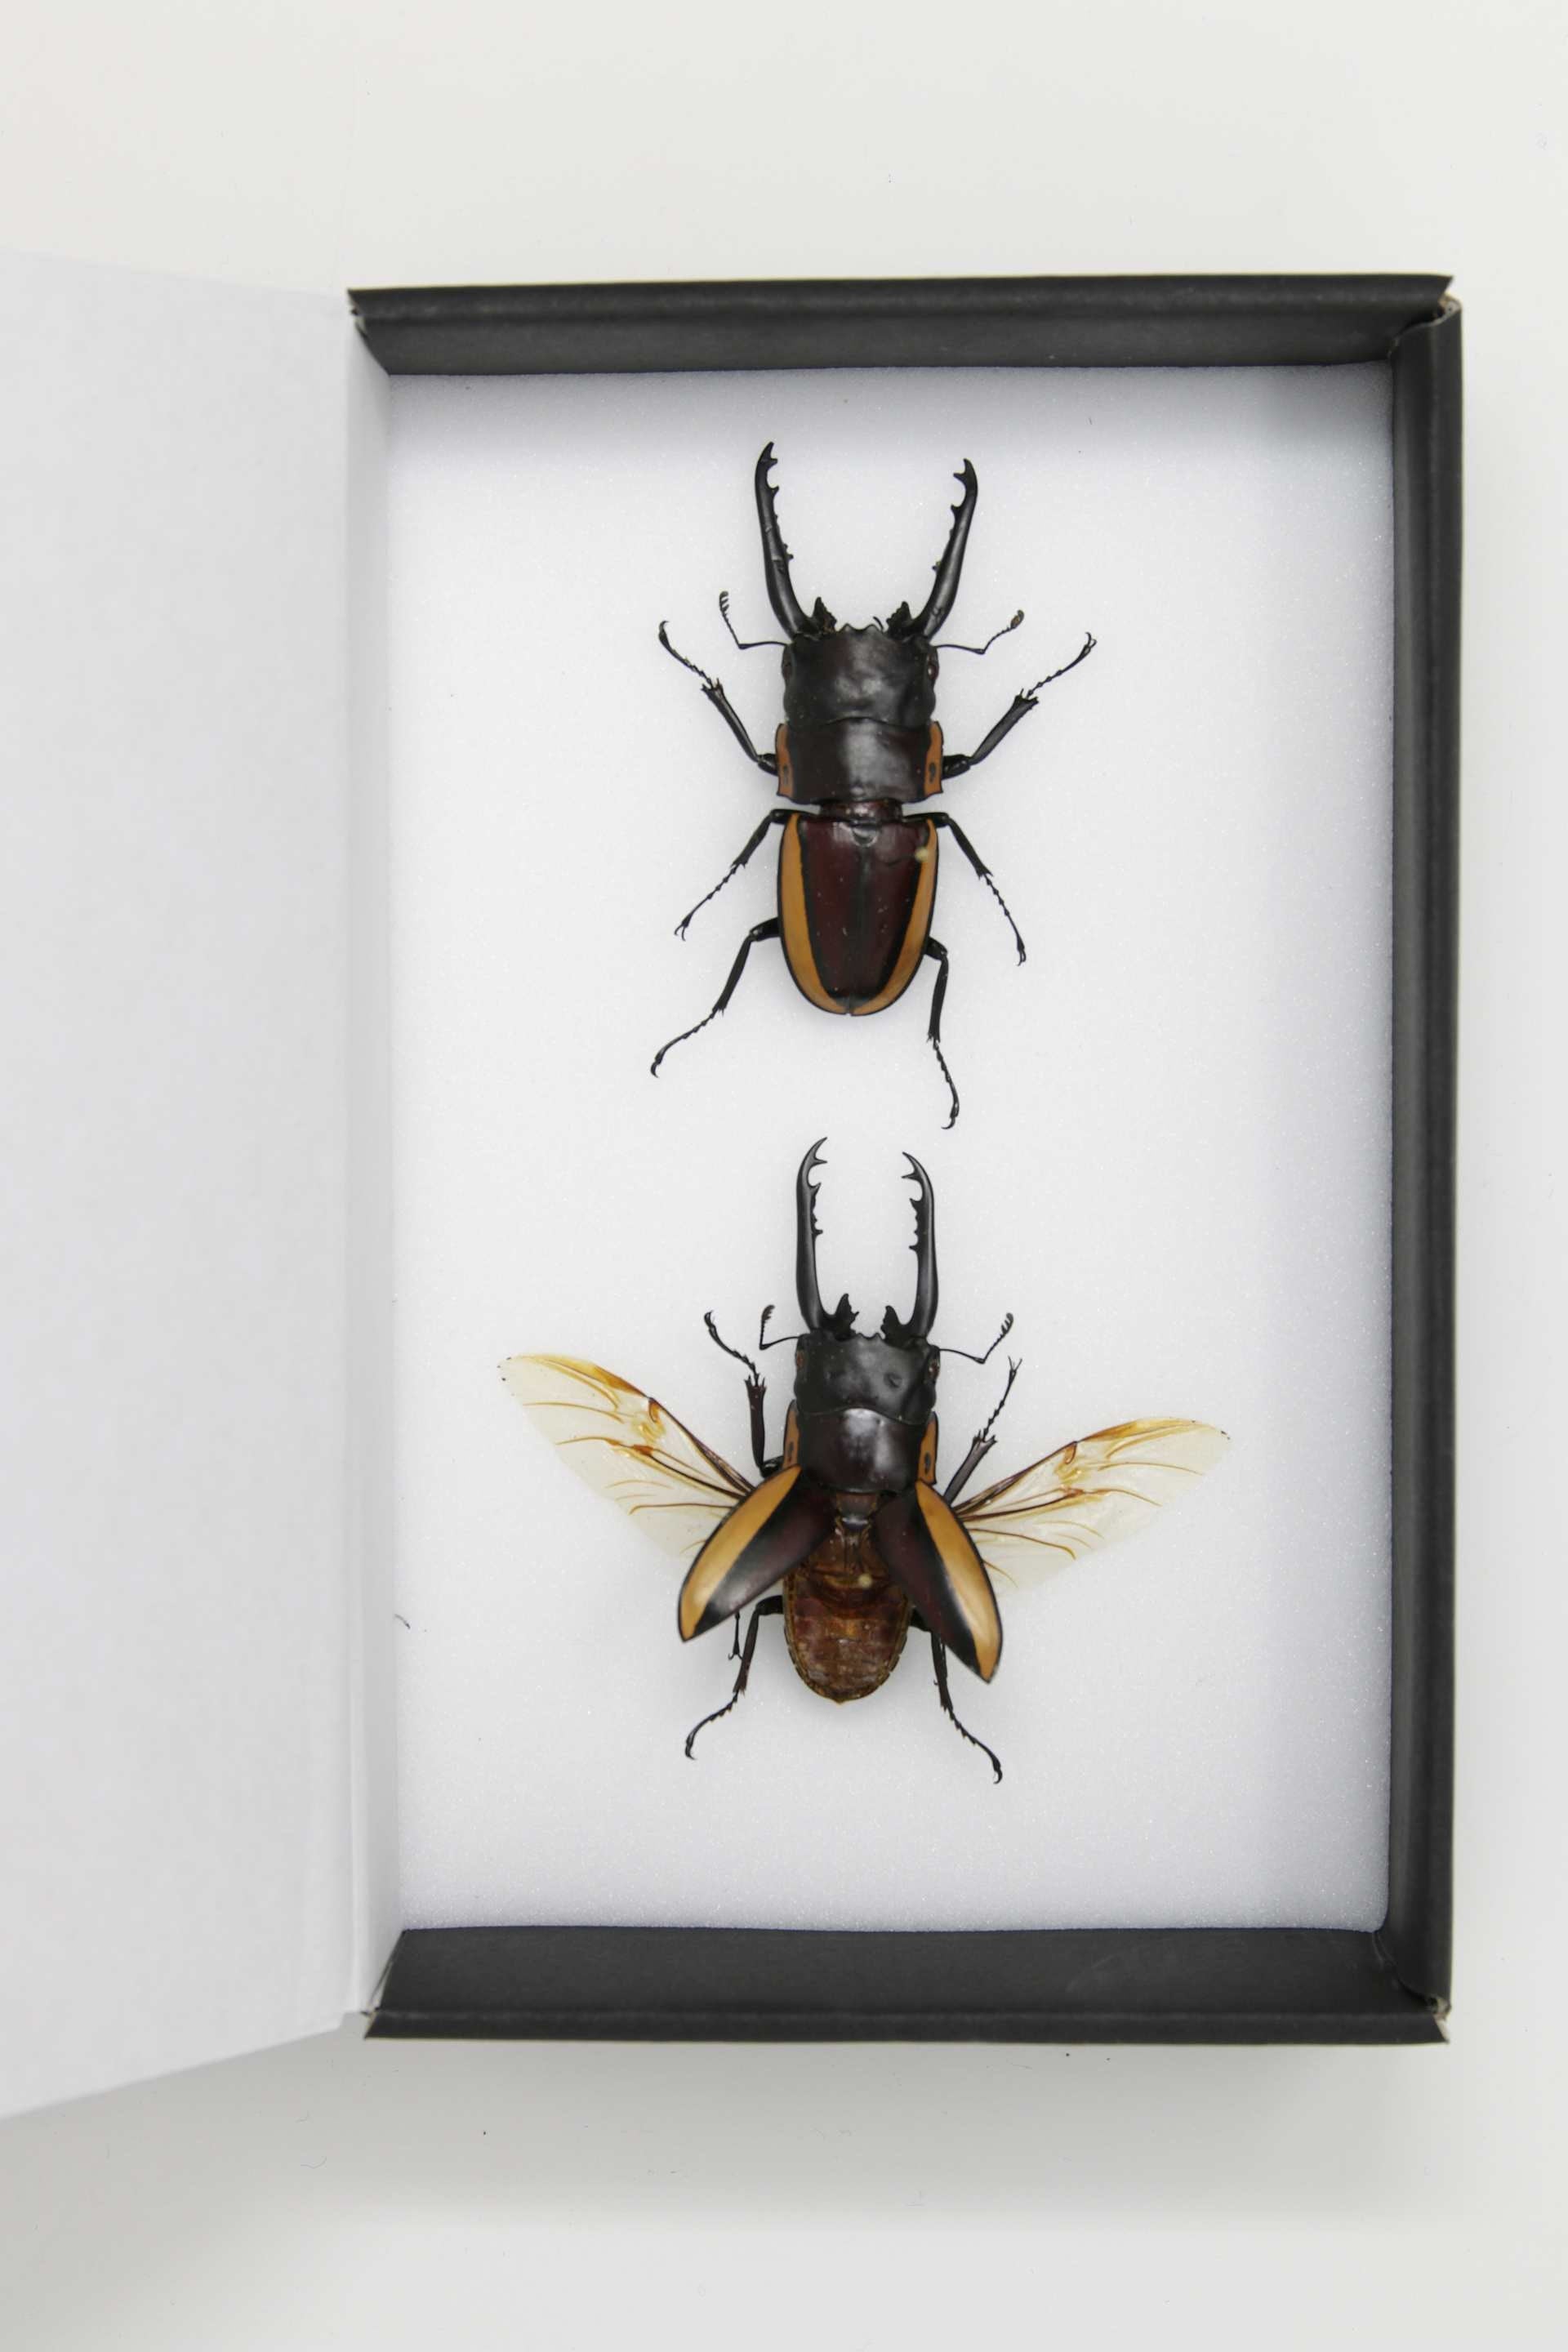 A Pair of Large Stag Beetles LUCANIDAE Dry-Preserved Mounted Specimens